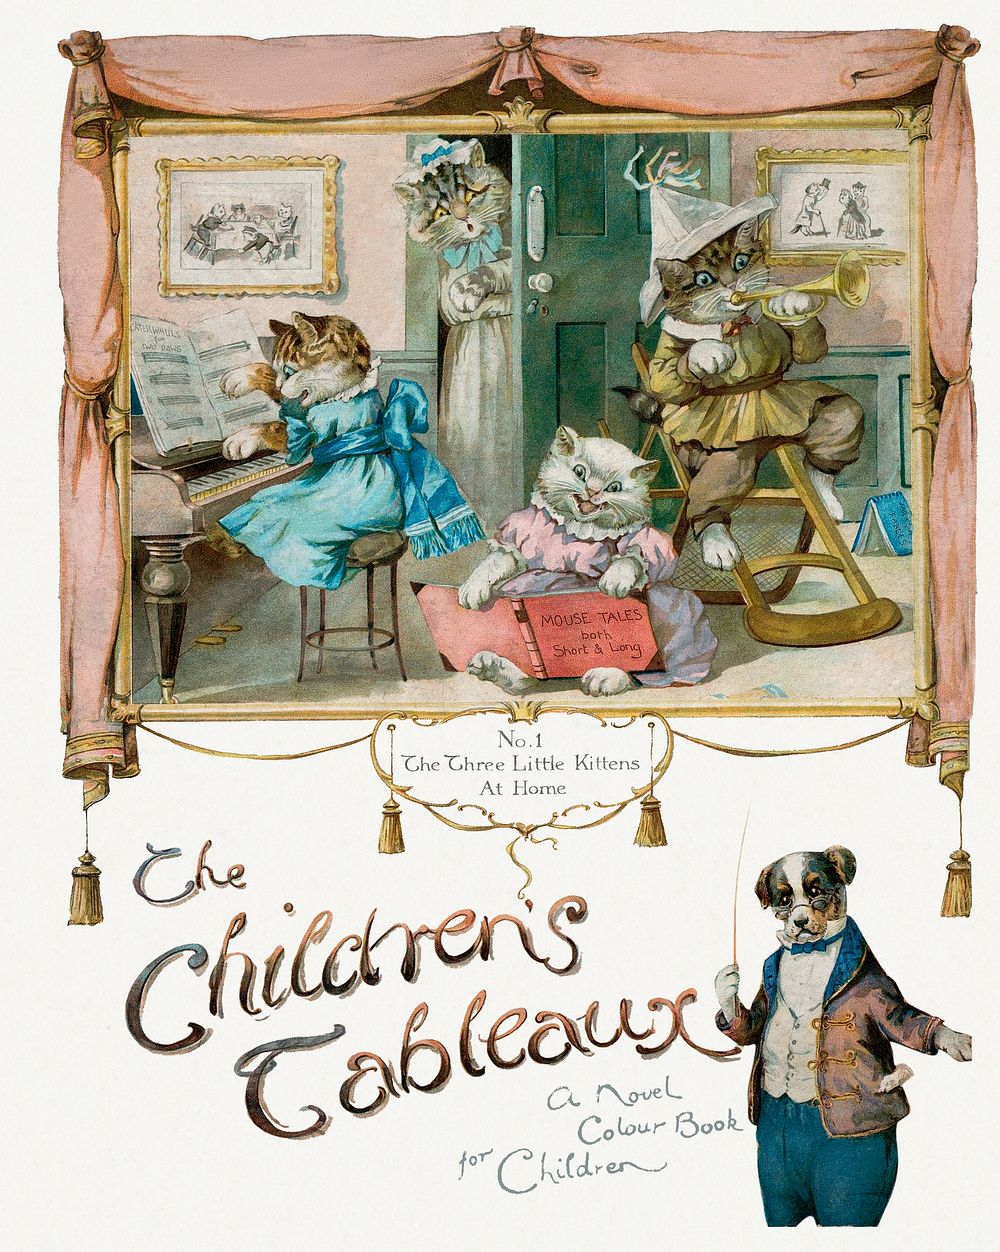 The Children's Tableaux, A Novel Colour Book with Pictures Arranged as Tableaux (1895) byErnest Nister. Original from The…